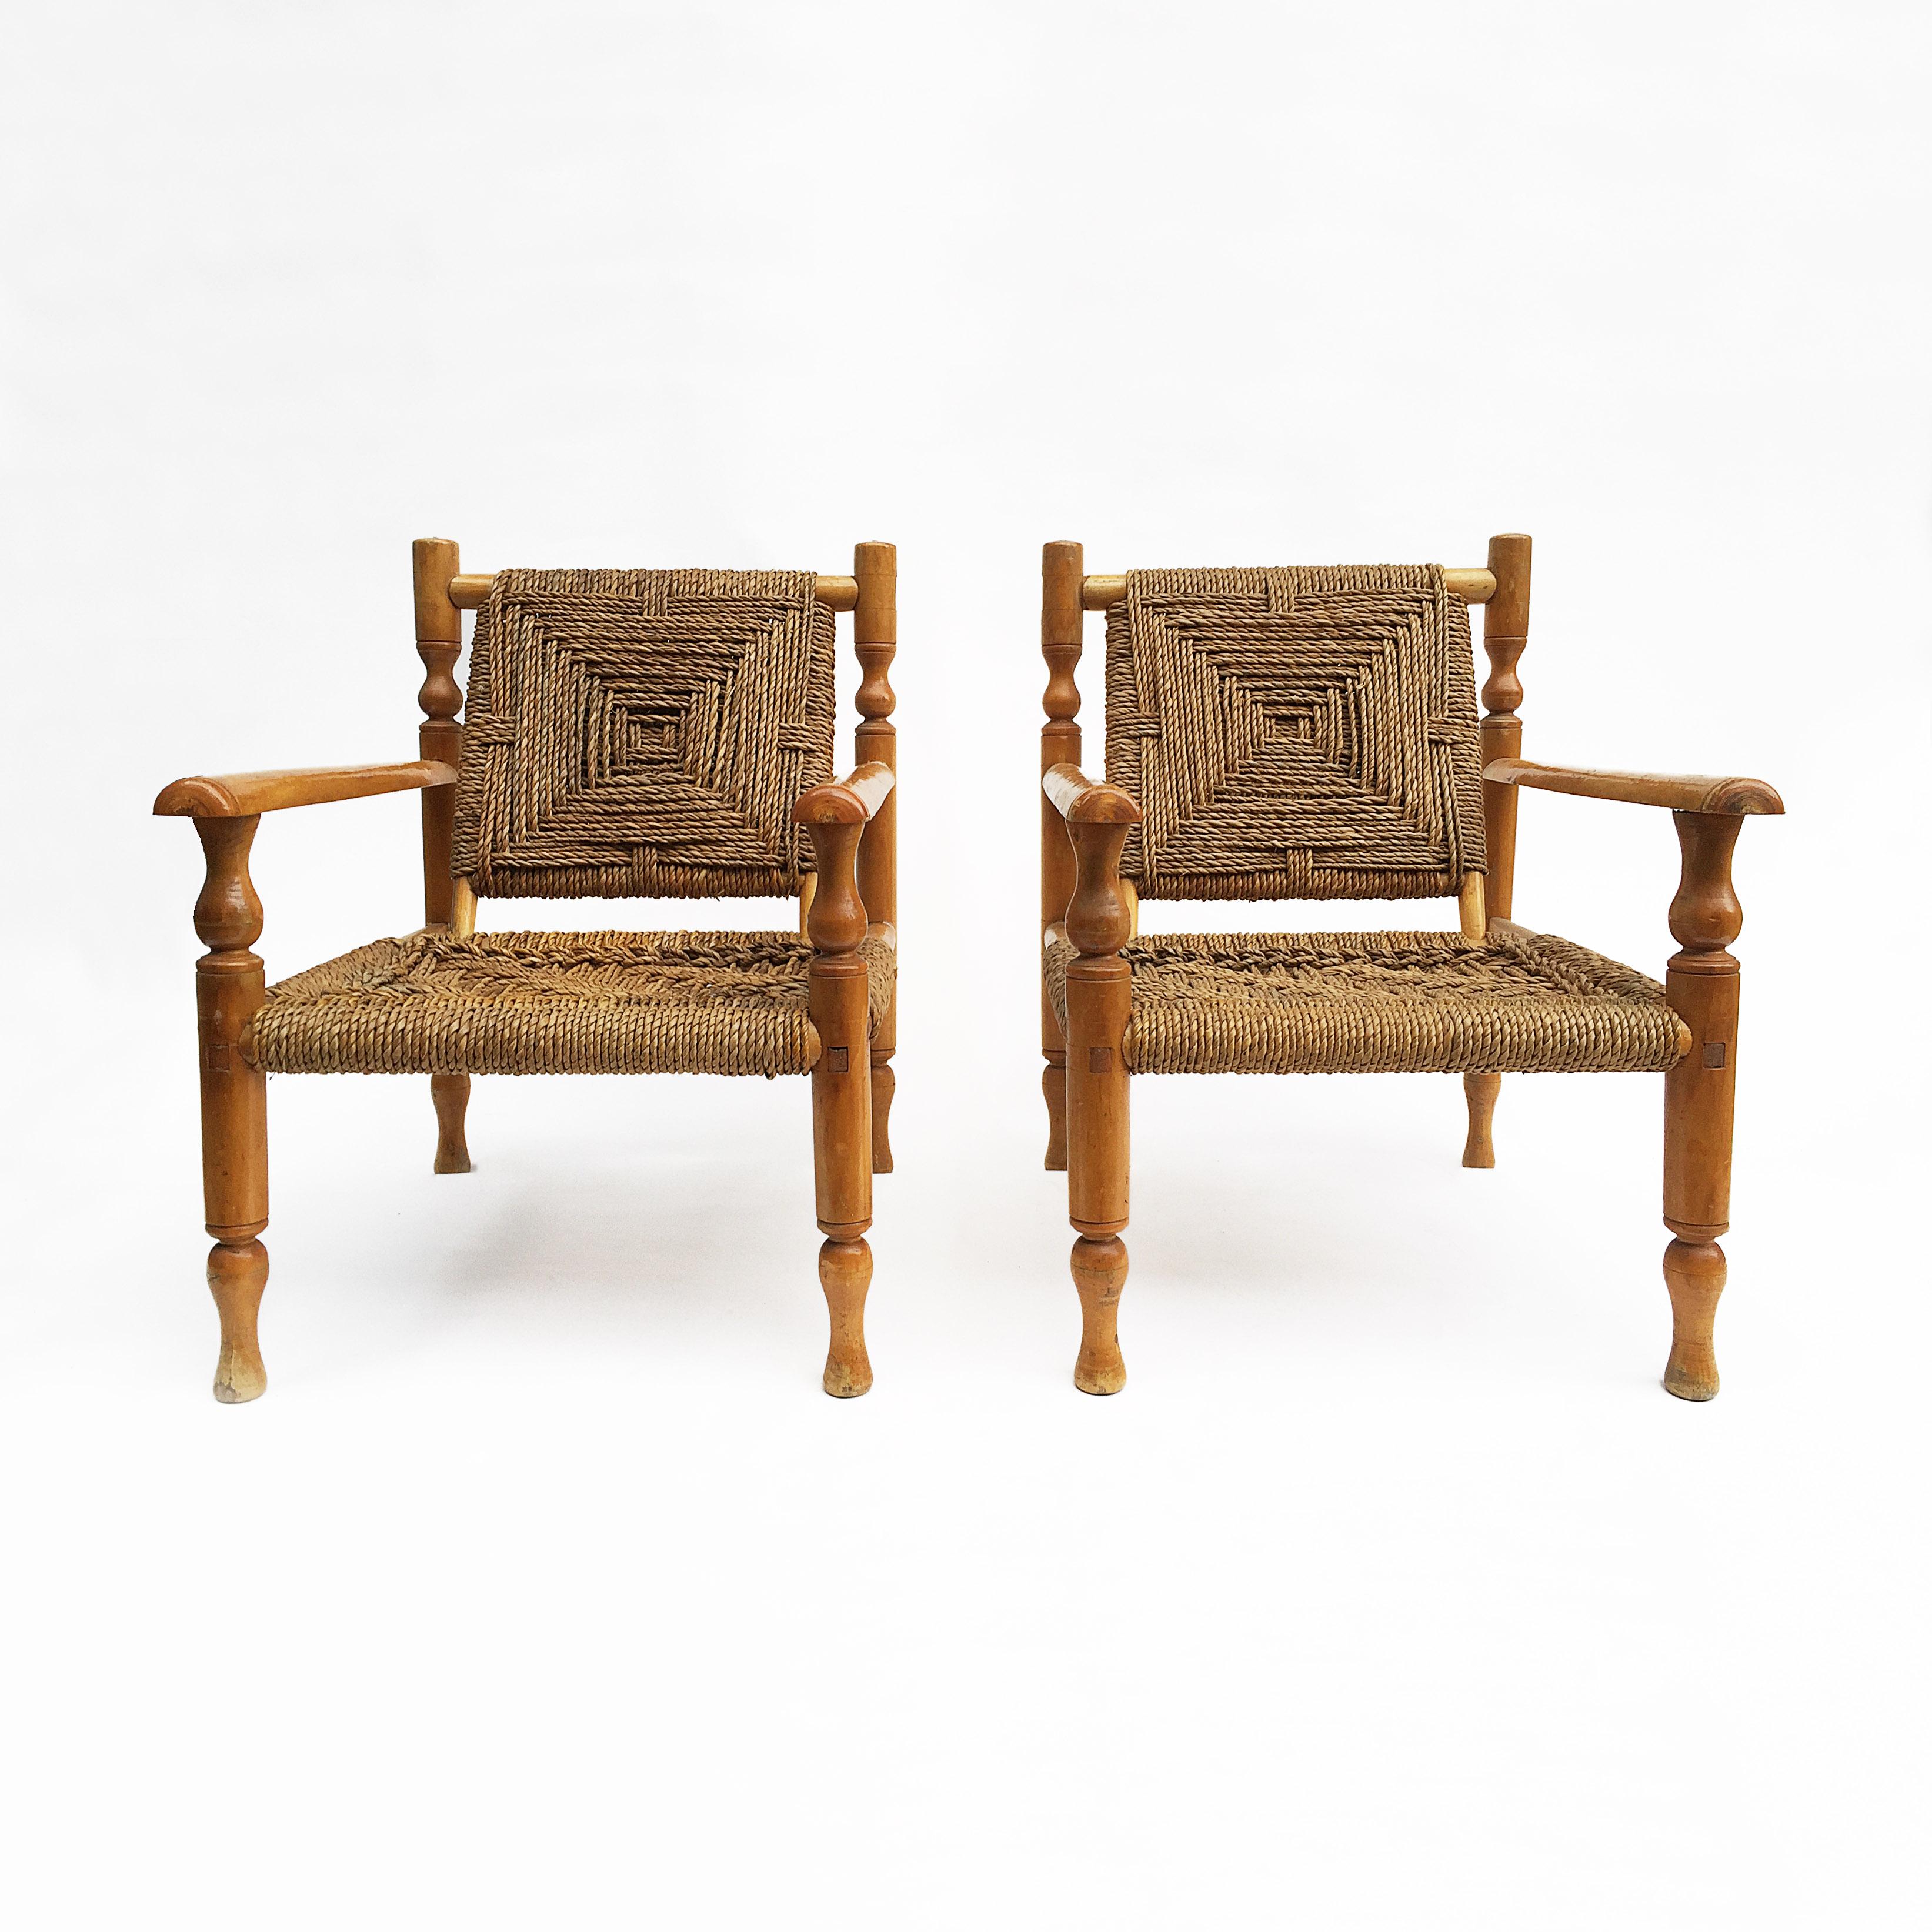 Highly desired pair of Charlotte Perriand style woven lounge armchairs beautifully crafted and structured. The frame of the chairs are build out of ashwood and comes with a woven sisal rope seat and backrest. Overall good condition but would benefit